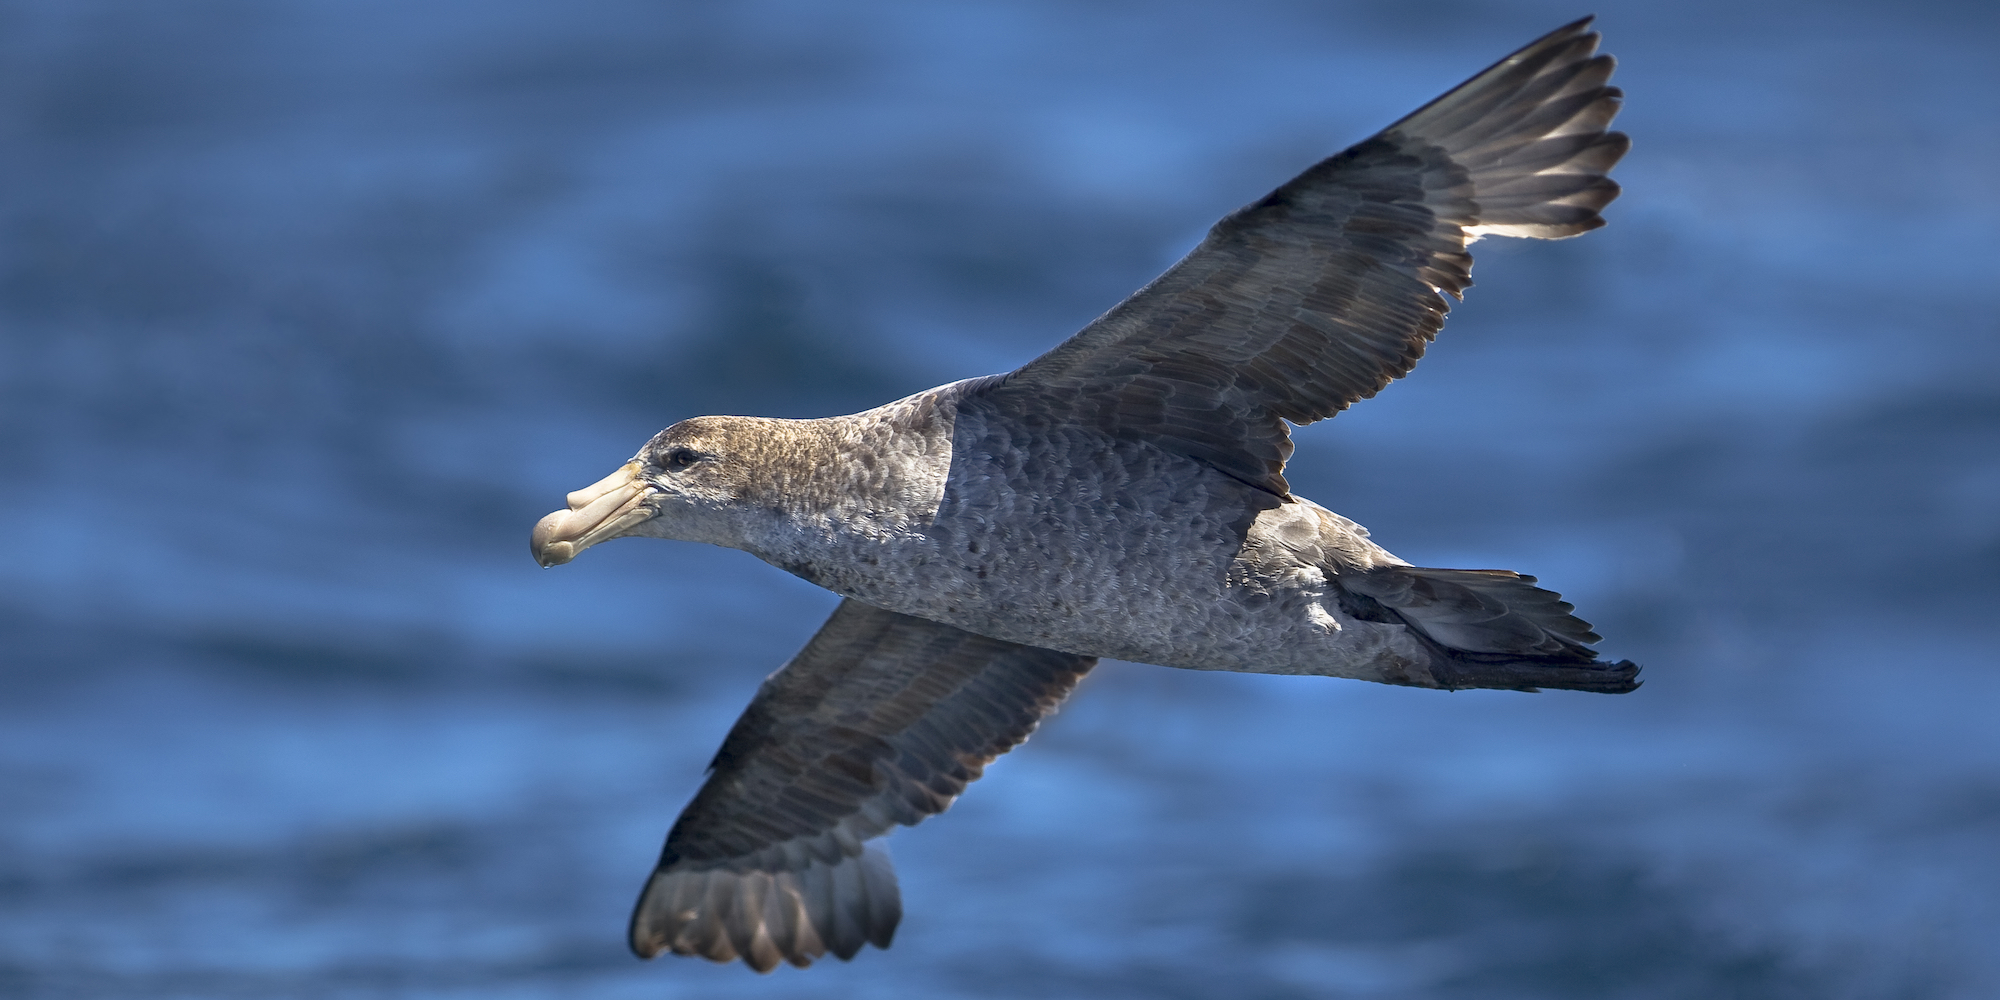 The underside of a cape petrel bird soaring on a sunny day in Antarctica